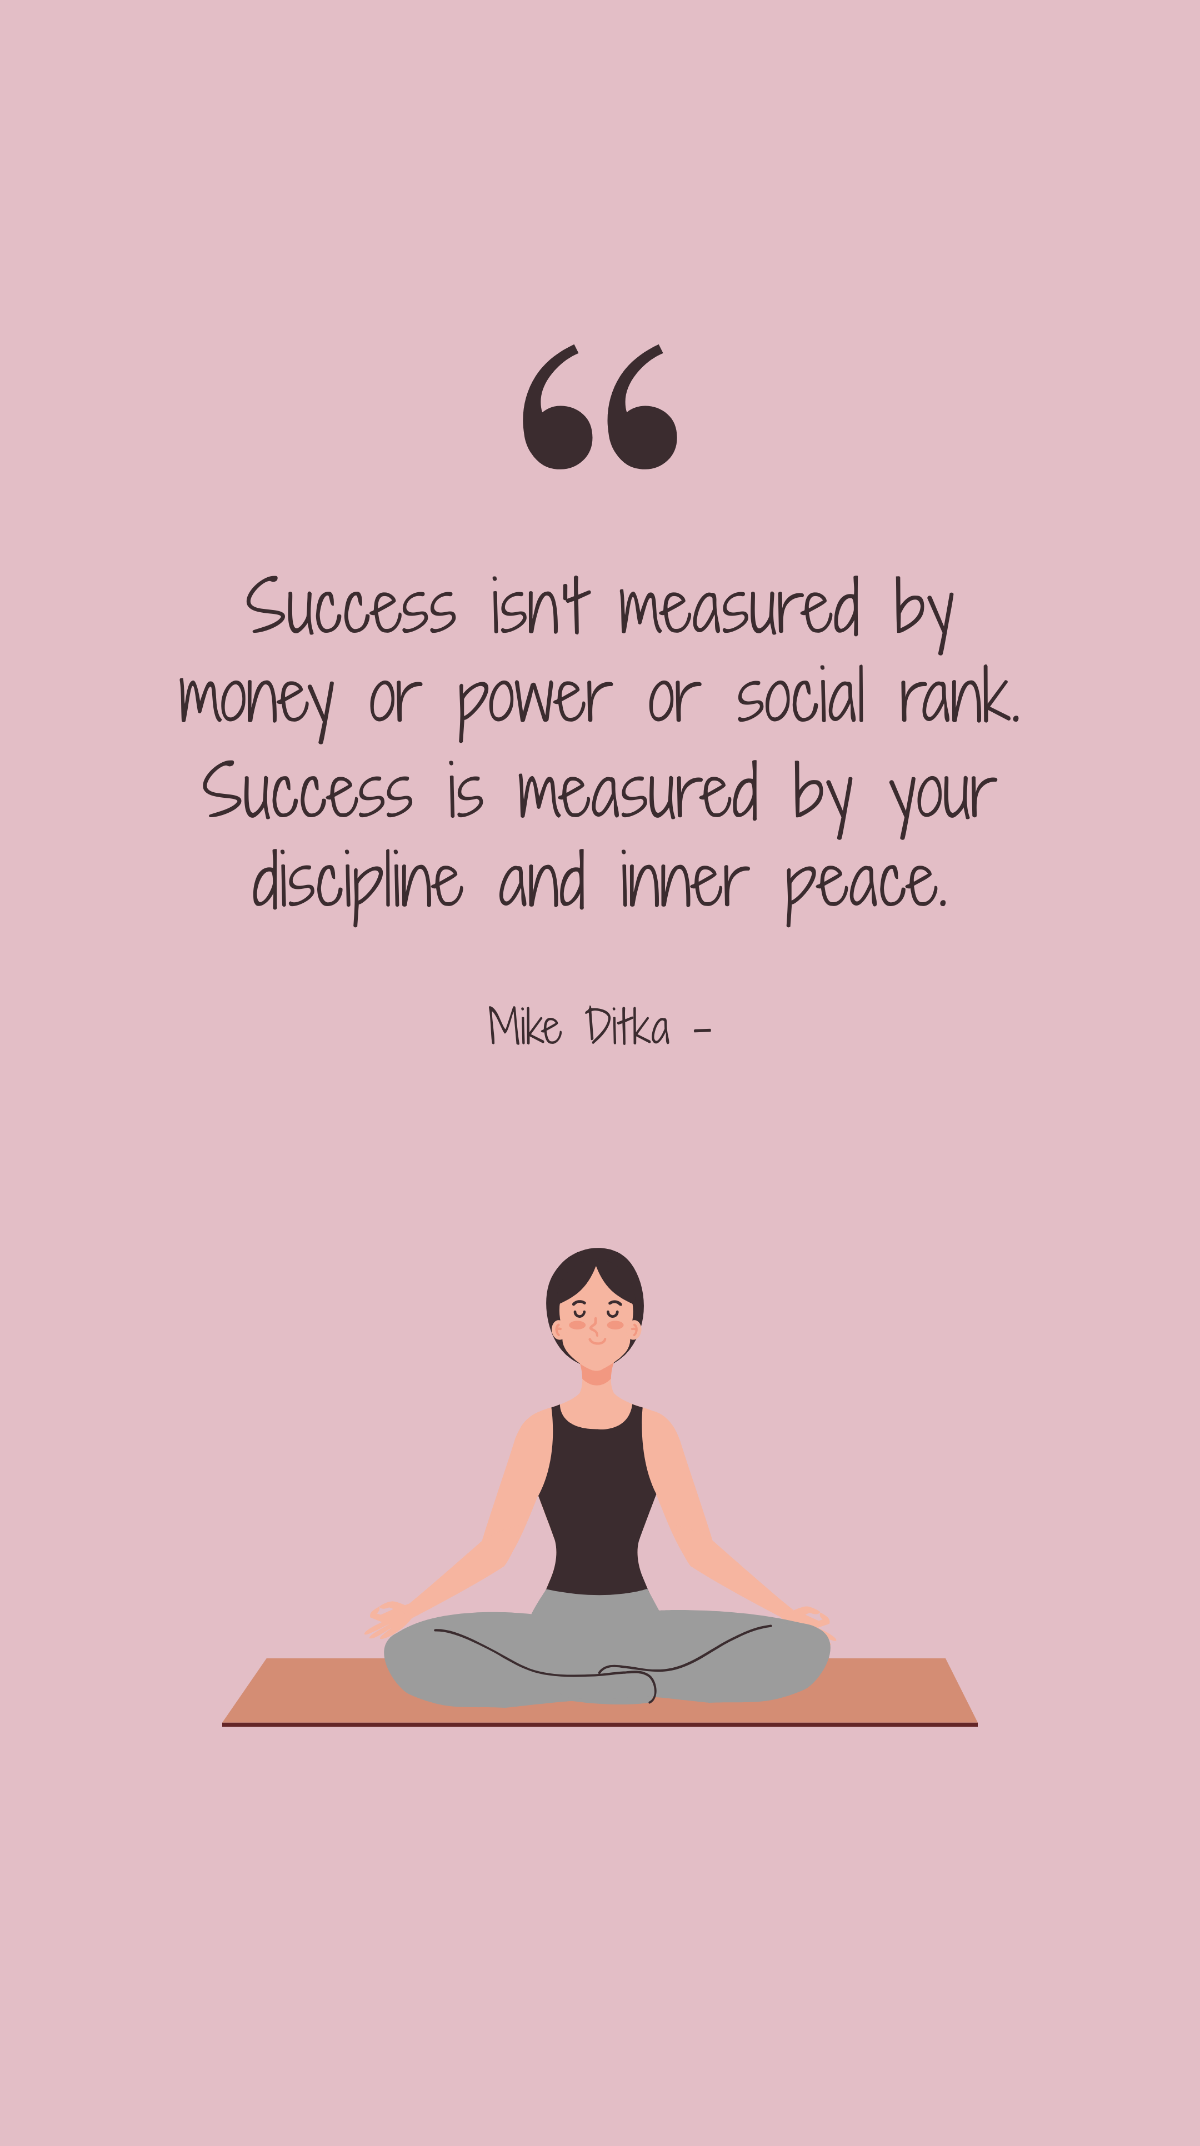 Mike Ditka - Success isn't measured by money or power or social rank. Success is measured by your discipline and inner peace. Template